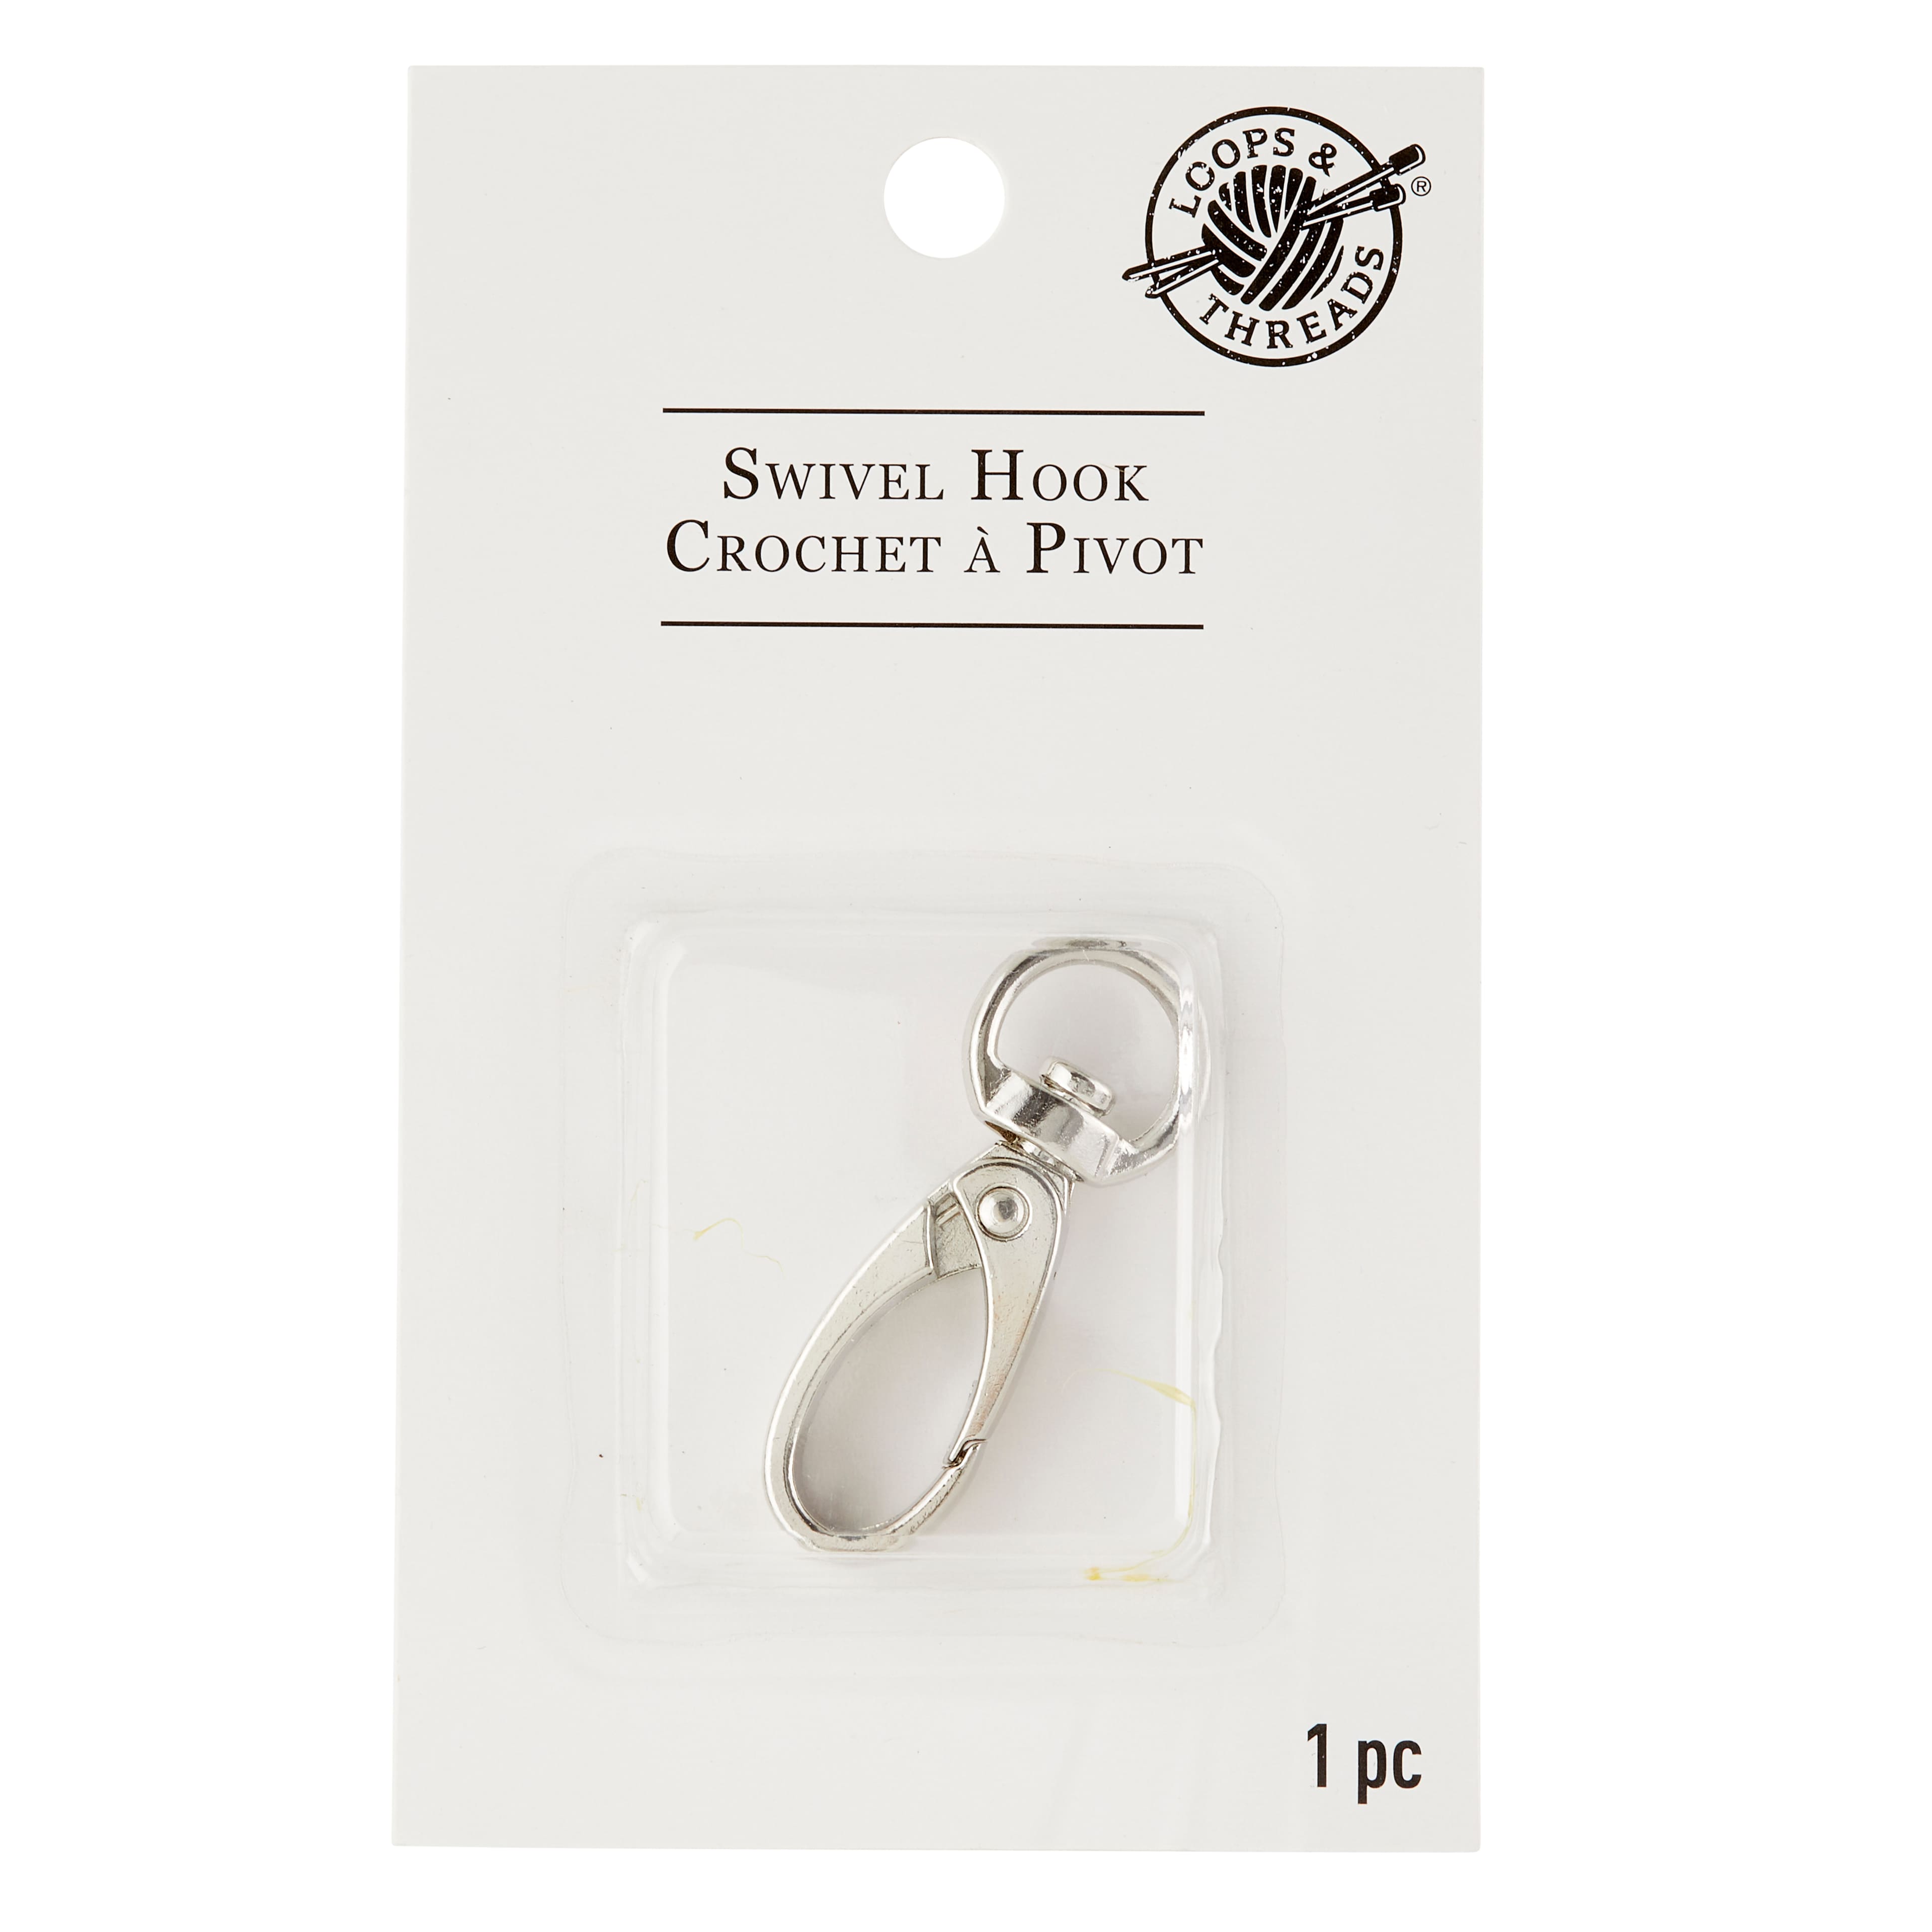 Shop for the Silver Swivel Hook by Loops & Threads® at Michaels